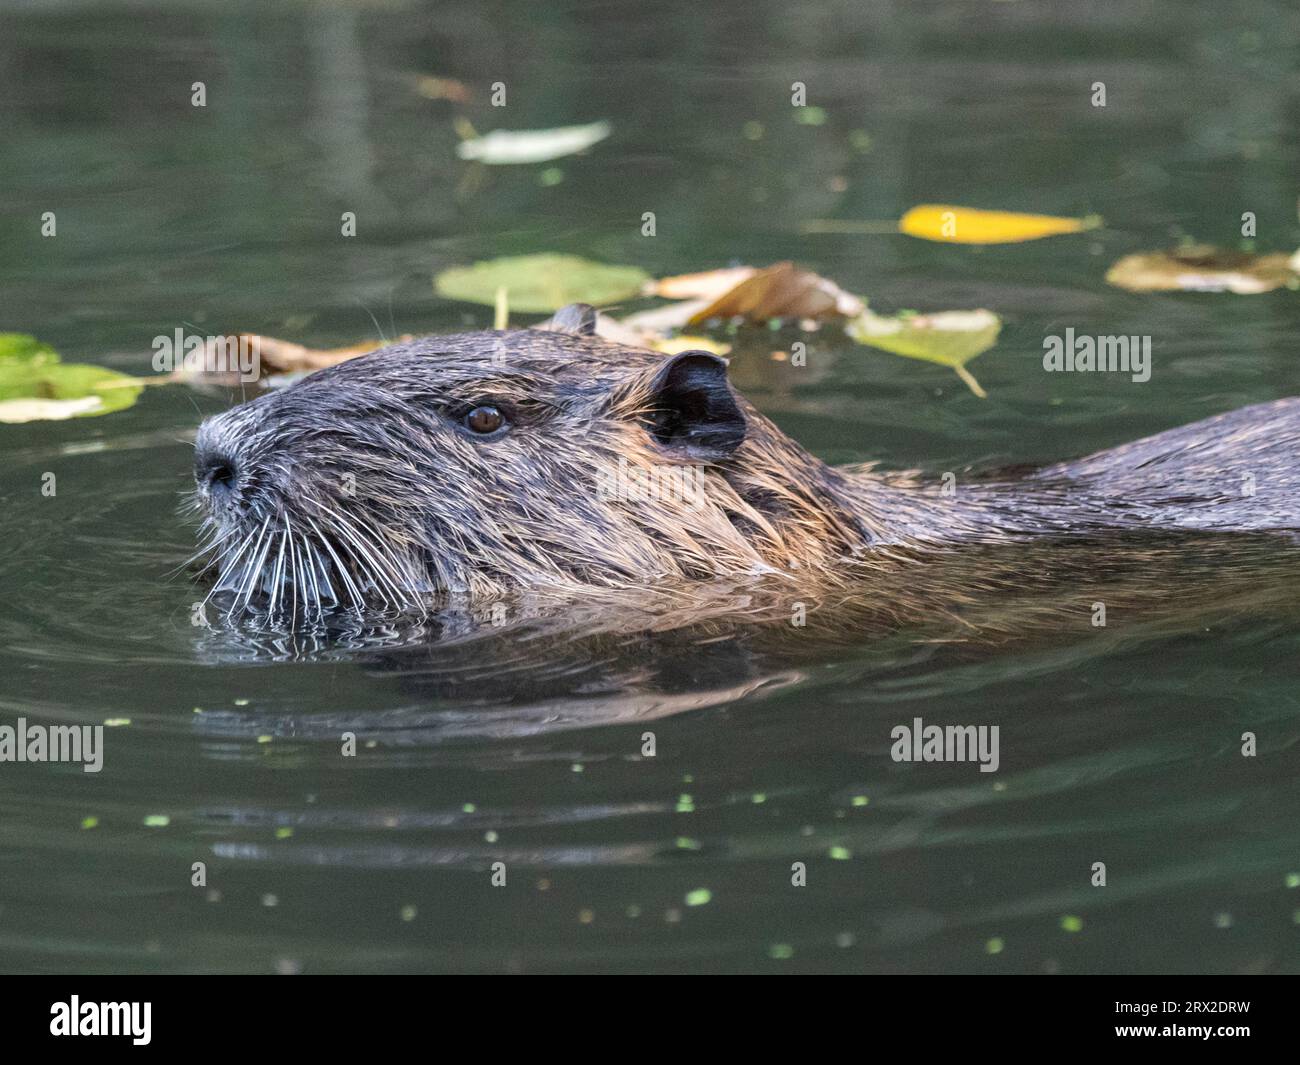 An adult nutria (Myocastor coypus), an invasive species introduced from South America, Spree Forest, Germany, Europe Stock Photo